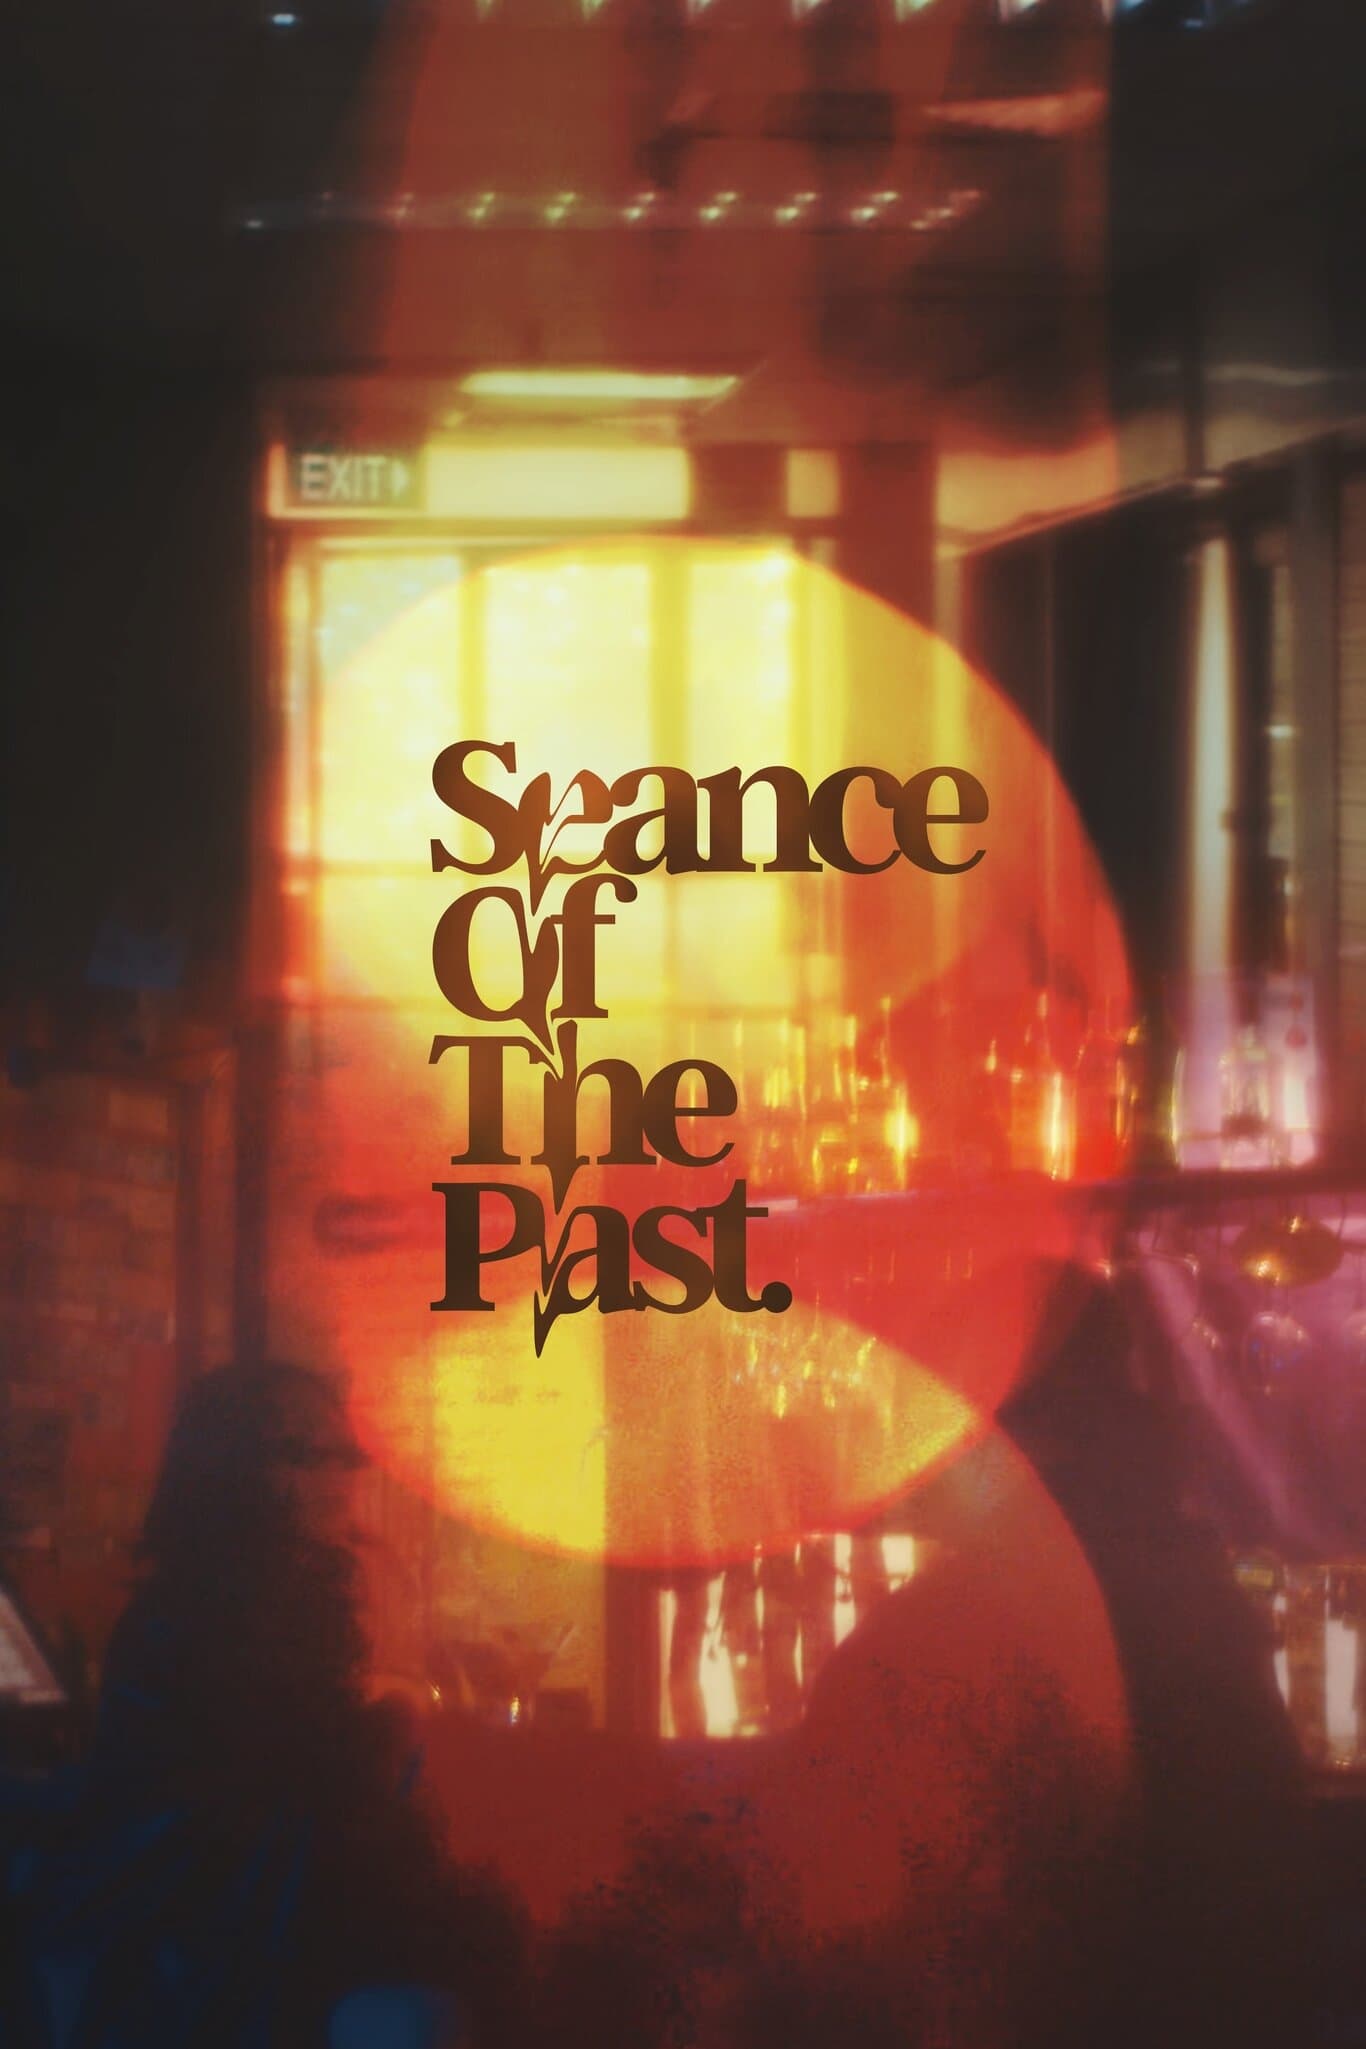 Seance of the Past